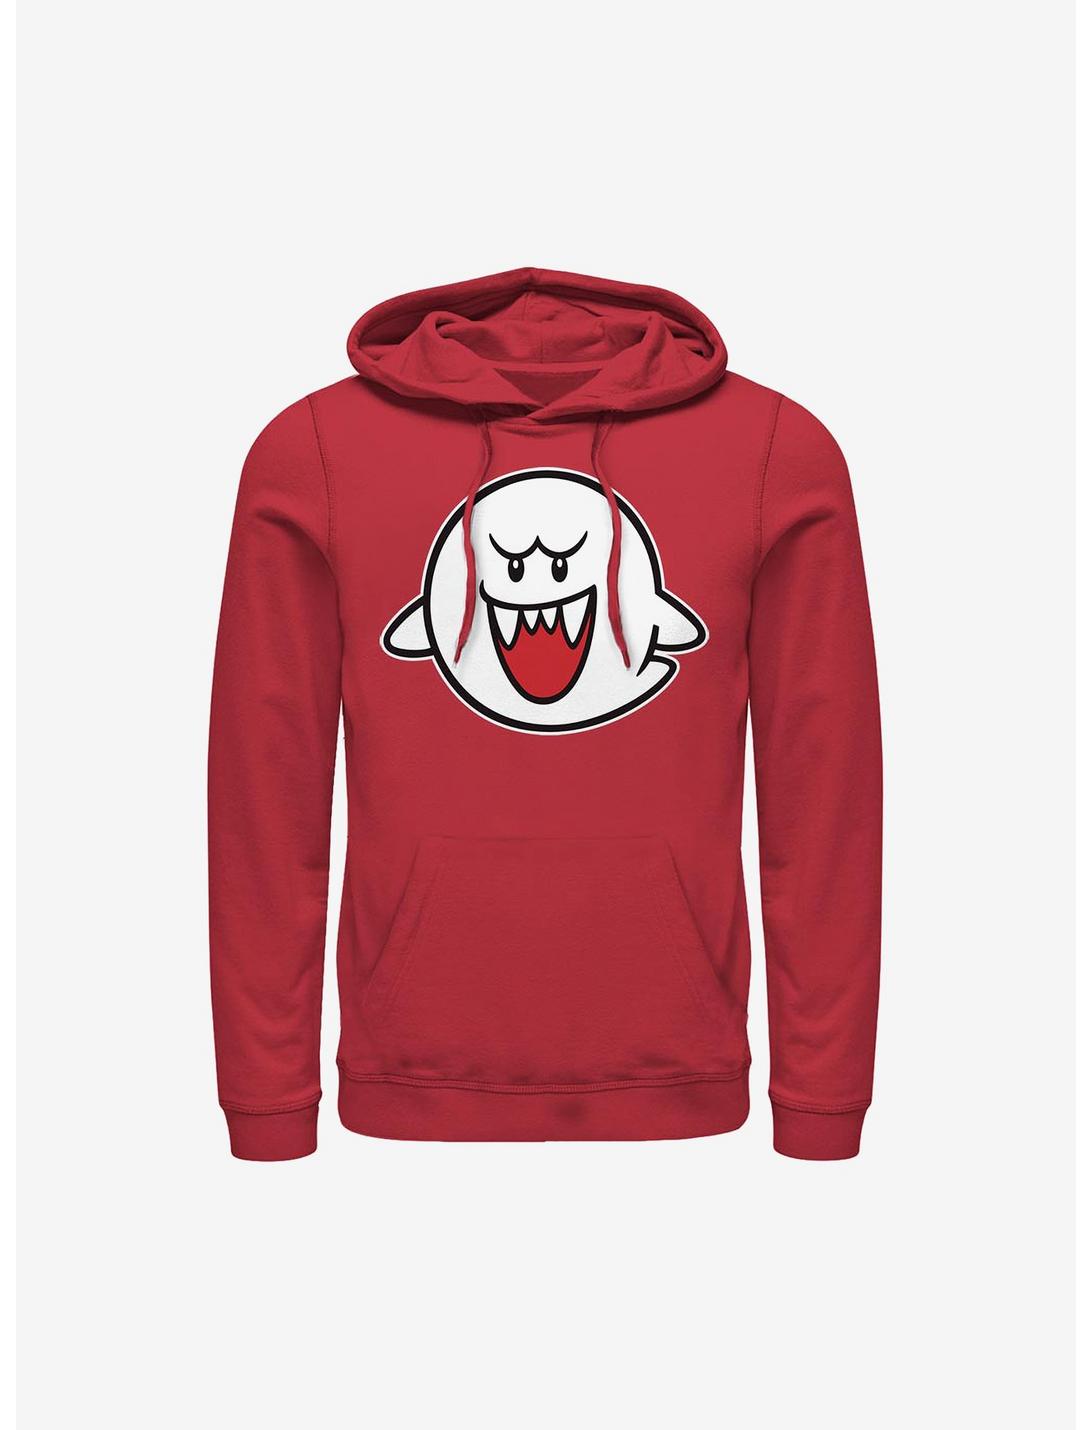 Nintendo Straight Up Boo Hoodie, RED, hi-res